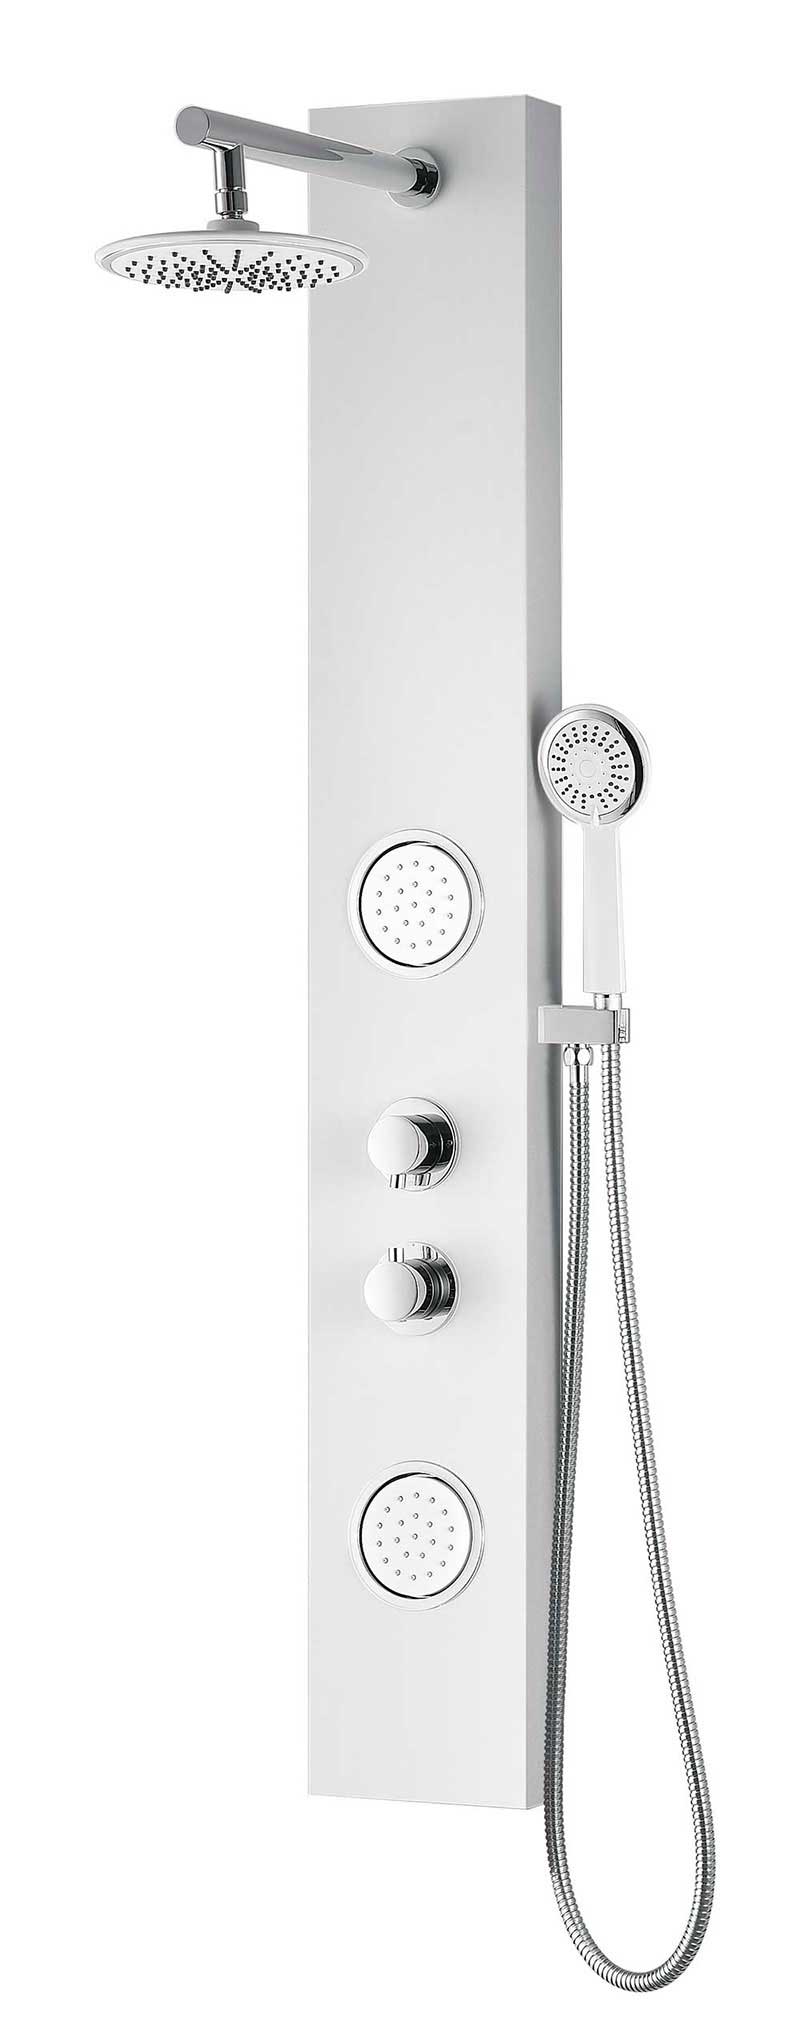 Anzzi Aquifer Series 56 in. Full Body Shower Panel System with Heavy Rain Shower and Spray Wand in White